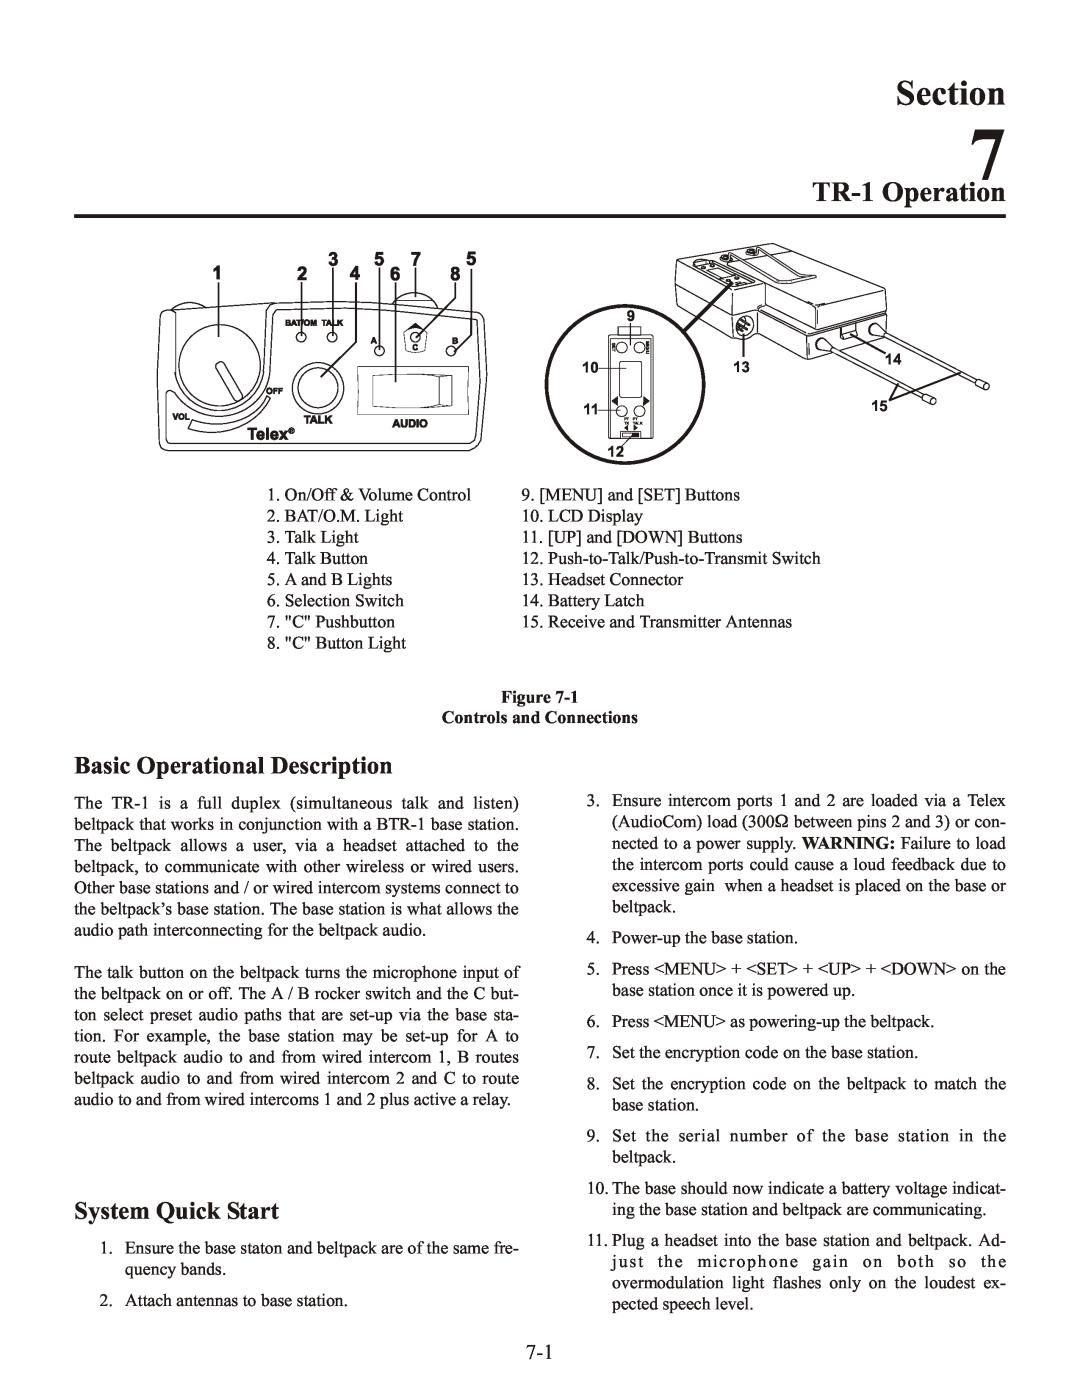 Telex BTR-1 TR-1 Operation, System Quick Start, Section, Basic Operational Description, Controls and Connections 